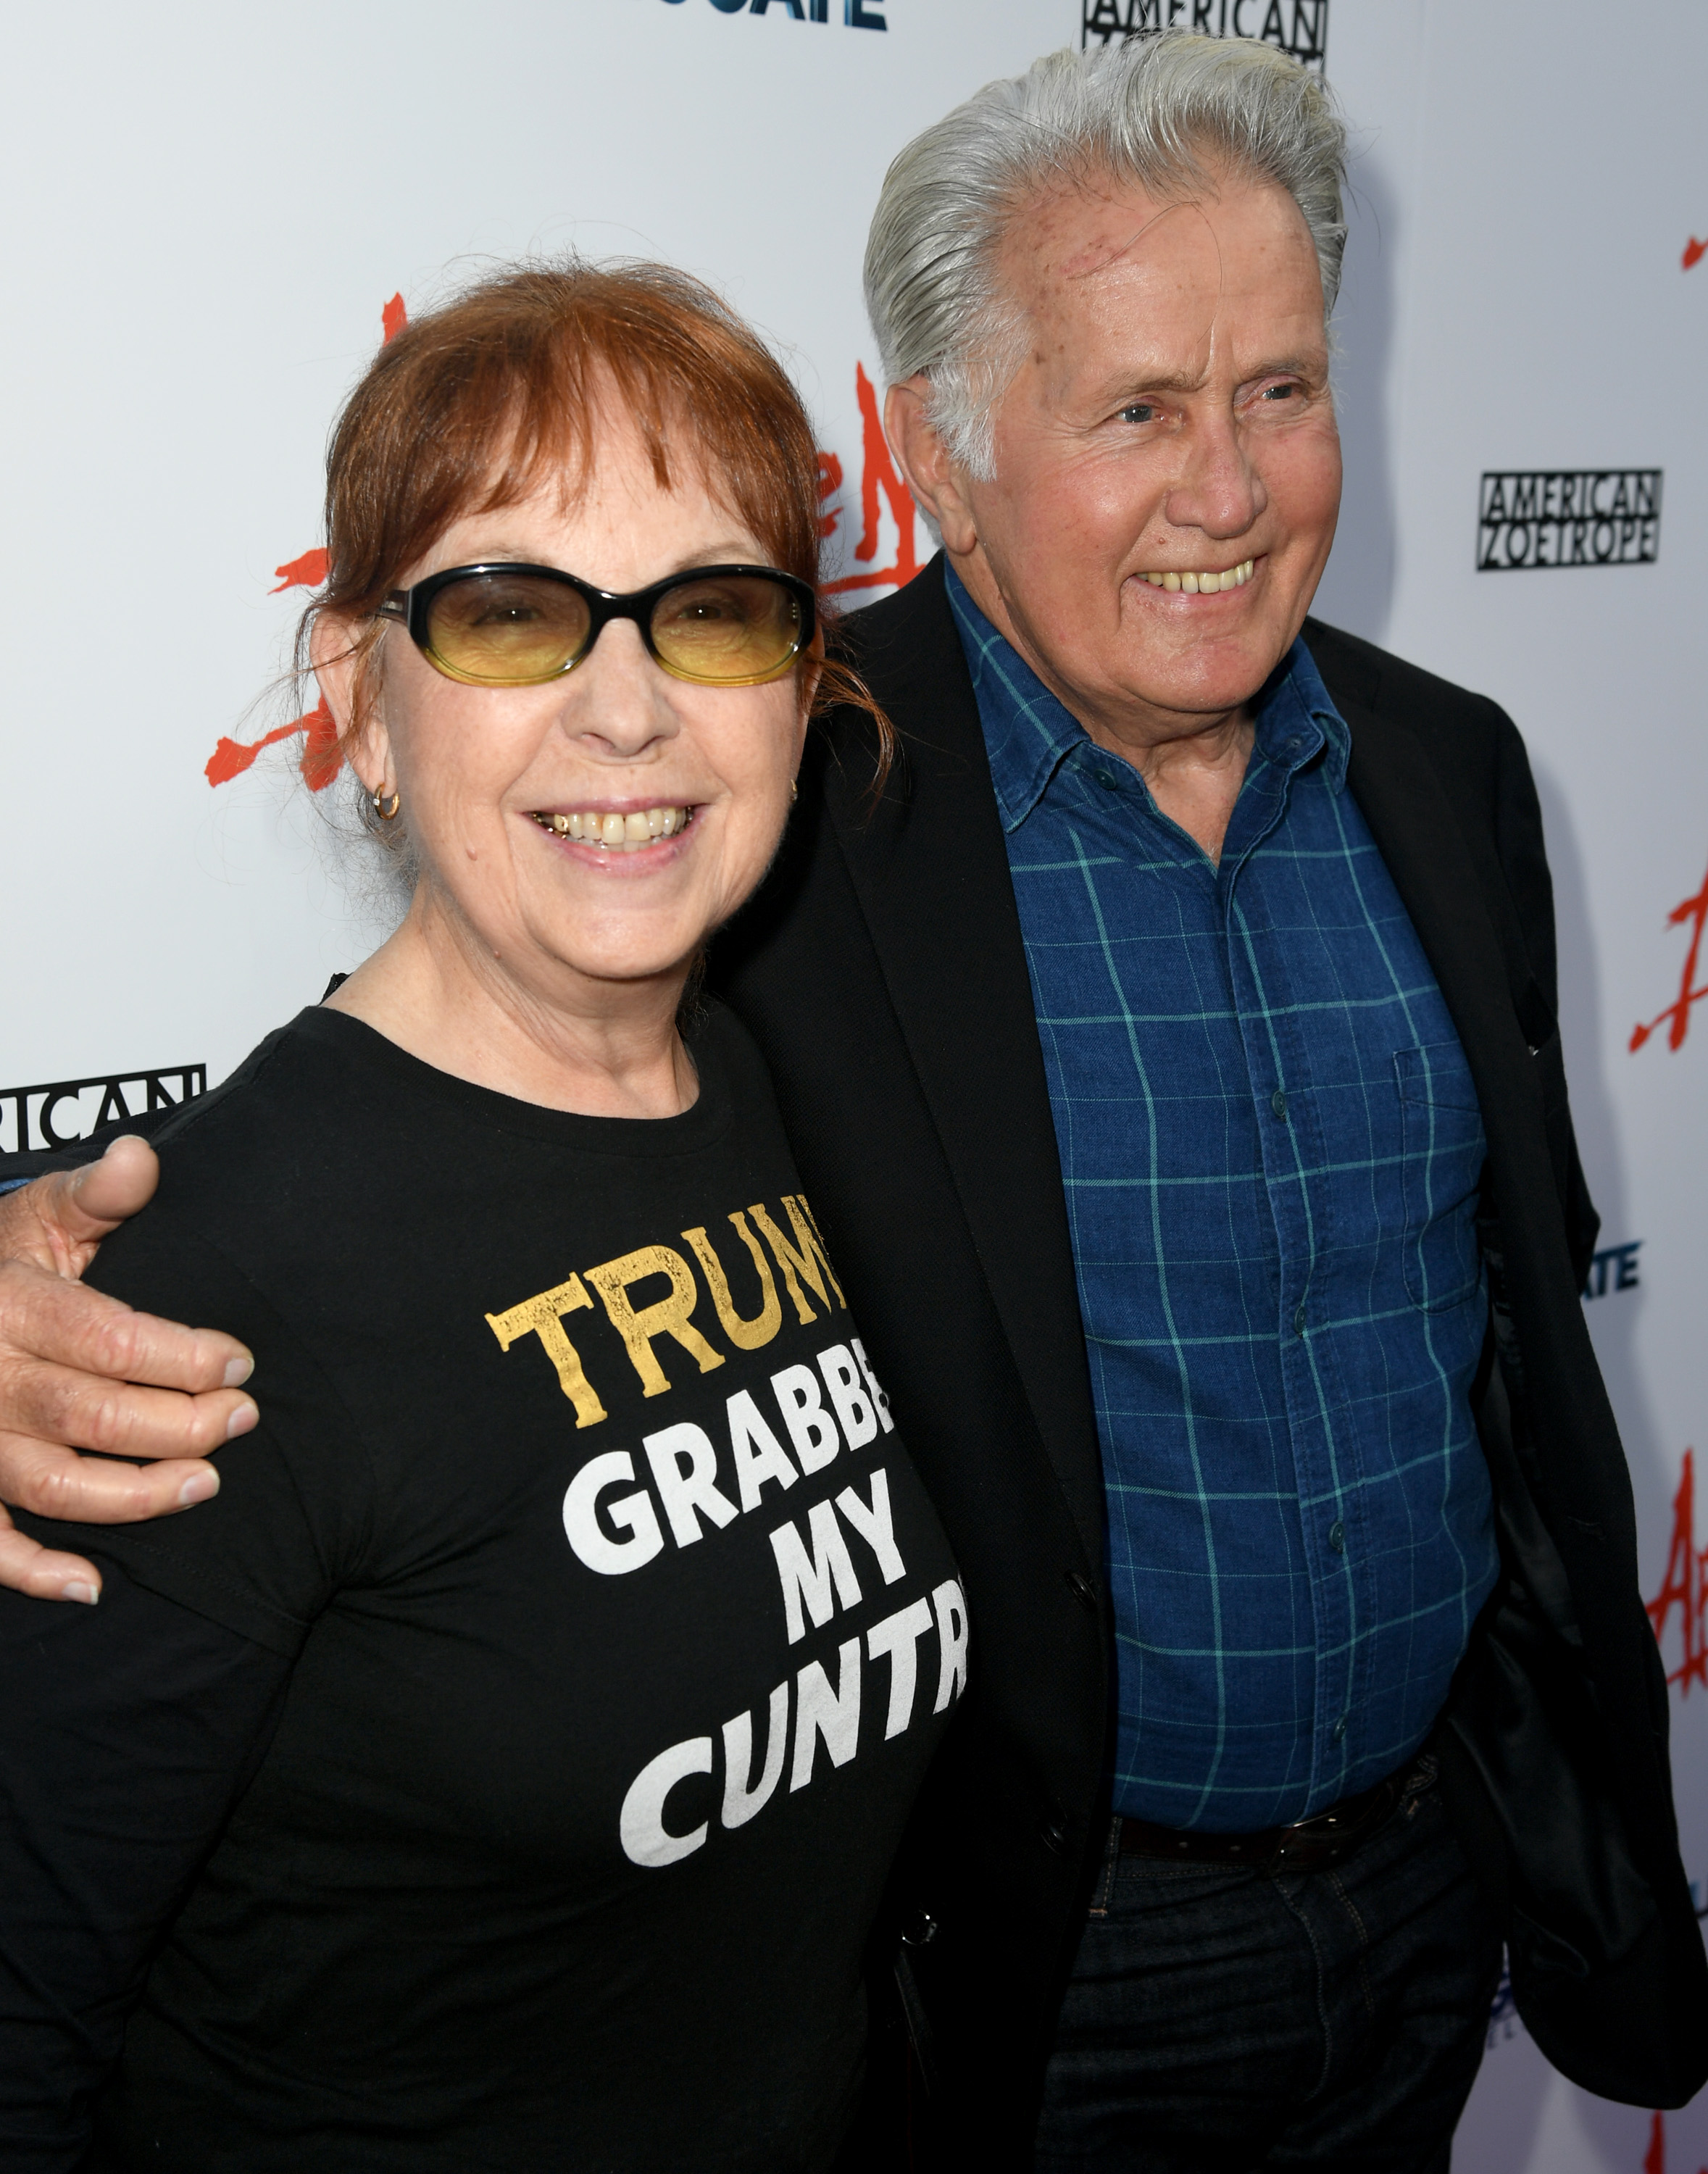 Martin Sheen and his wife Janet Sheen arrive at the premiere of Lionsgate's "Apocalypse Now Final Cut" the at ArcLight Cinerama Dome on August 12, 2019 in Hollywood, California | Source: Getty Images